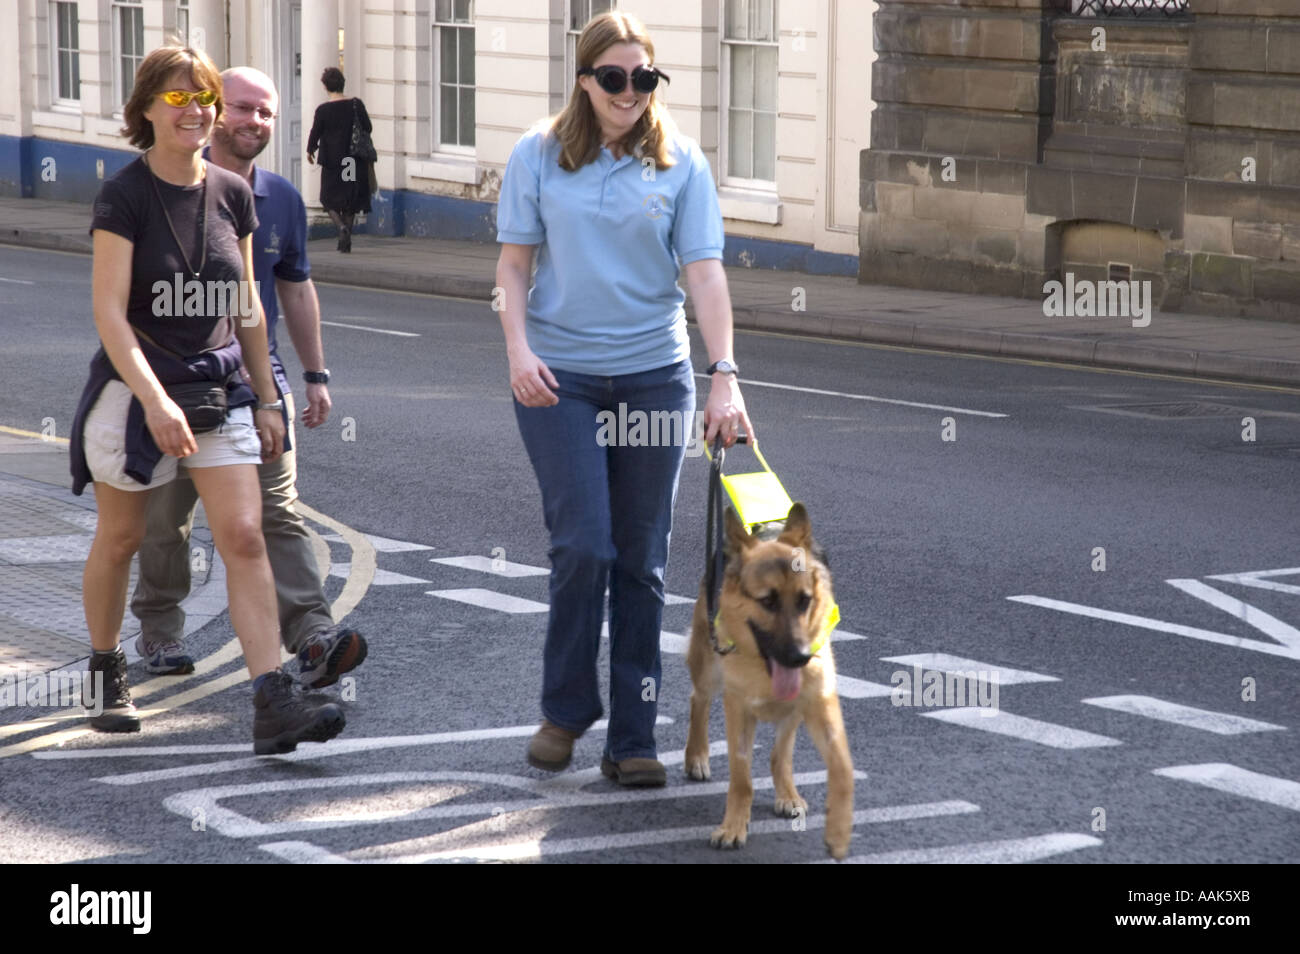 training guide dogs for the blind